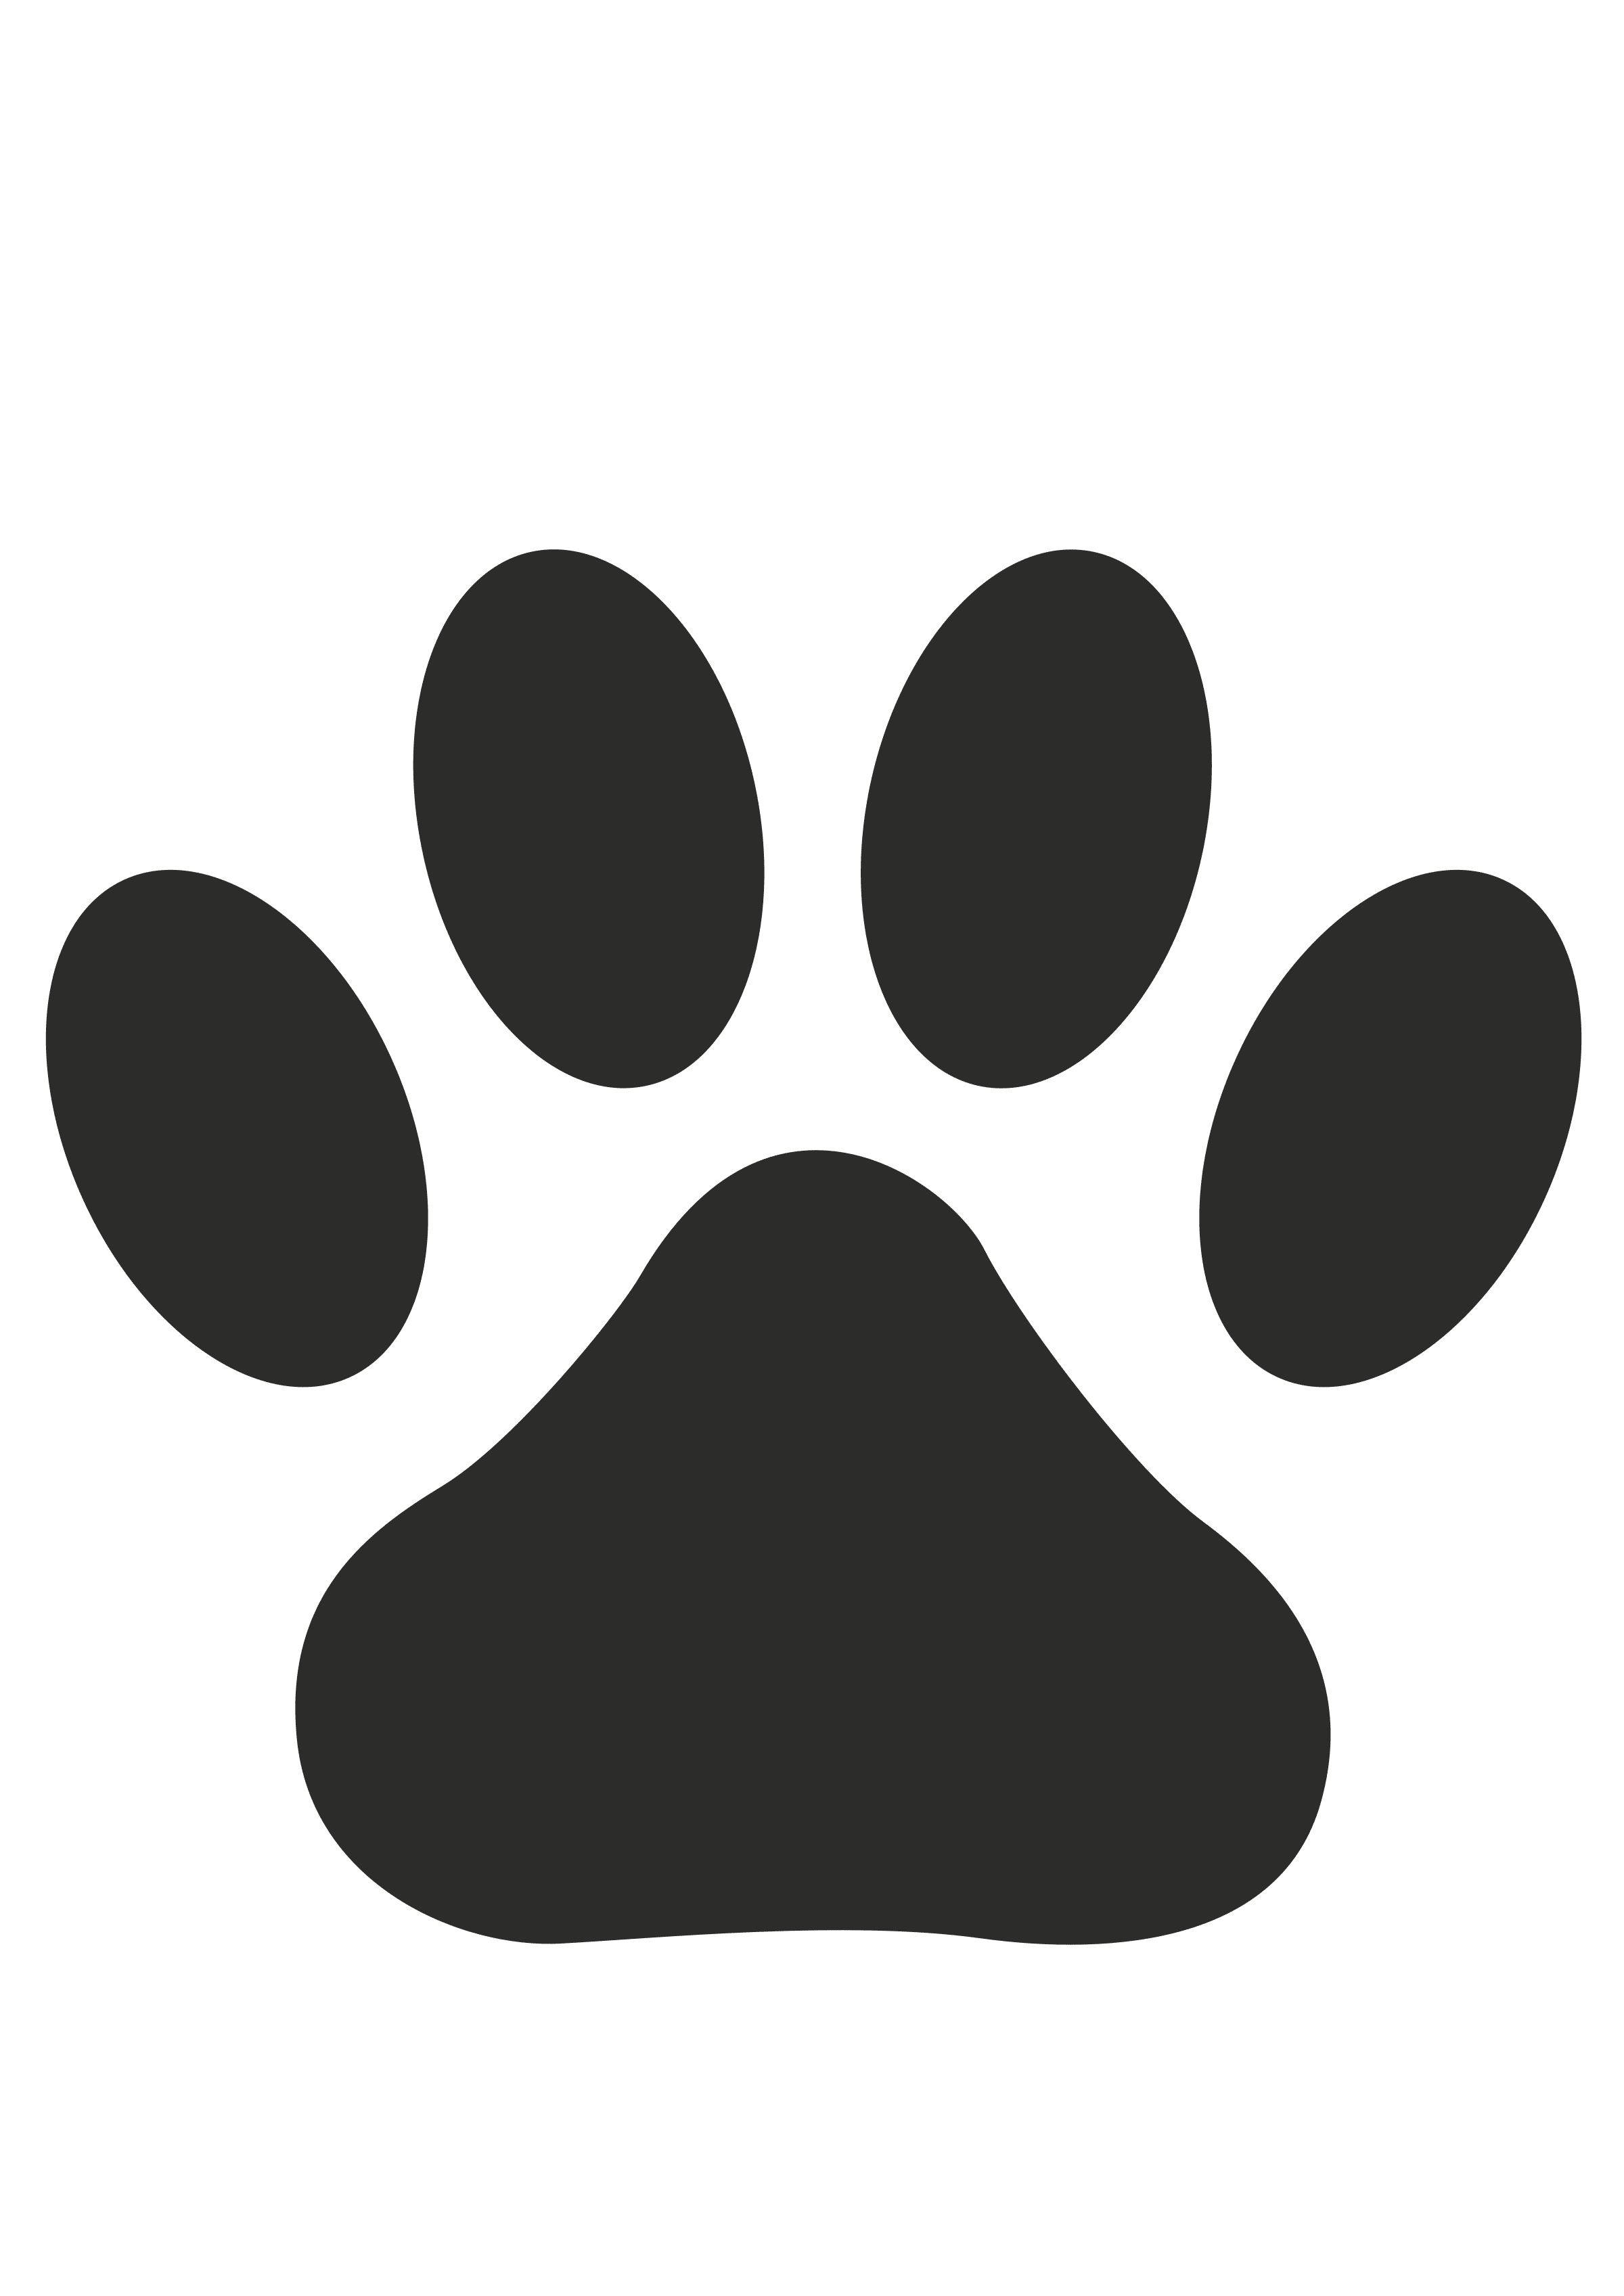 Download Paw Prints svg, Download Paw Prints svg for free 2019